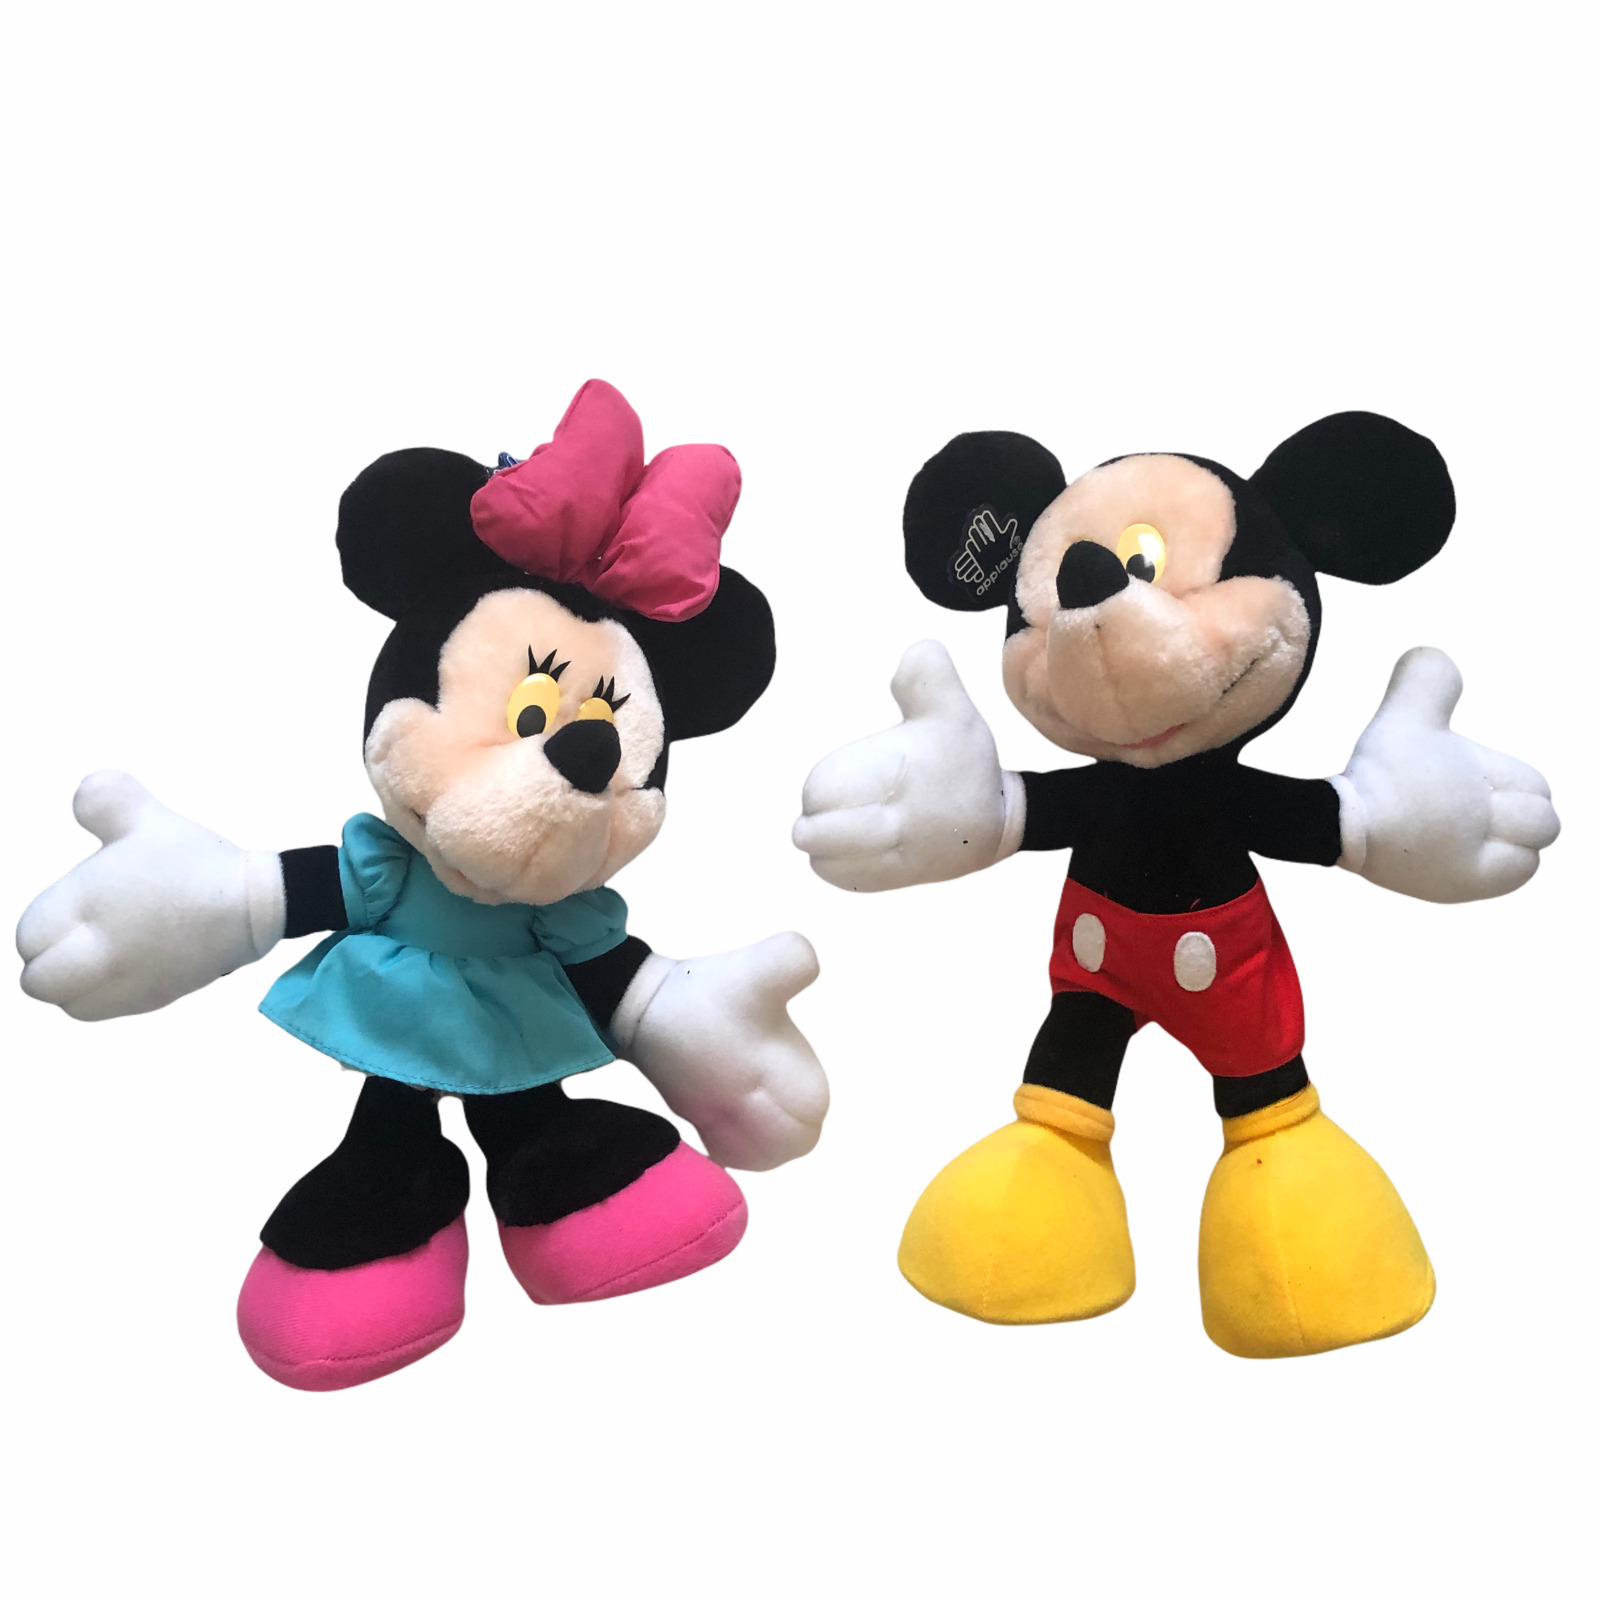 Disney Store Mickey Minnie Mouse Pair Broadway Singer Dancer Plush Toy 12